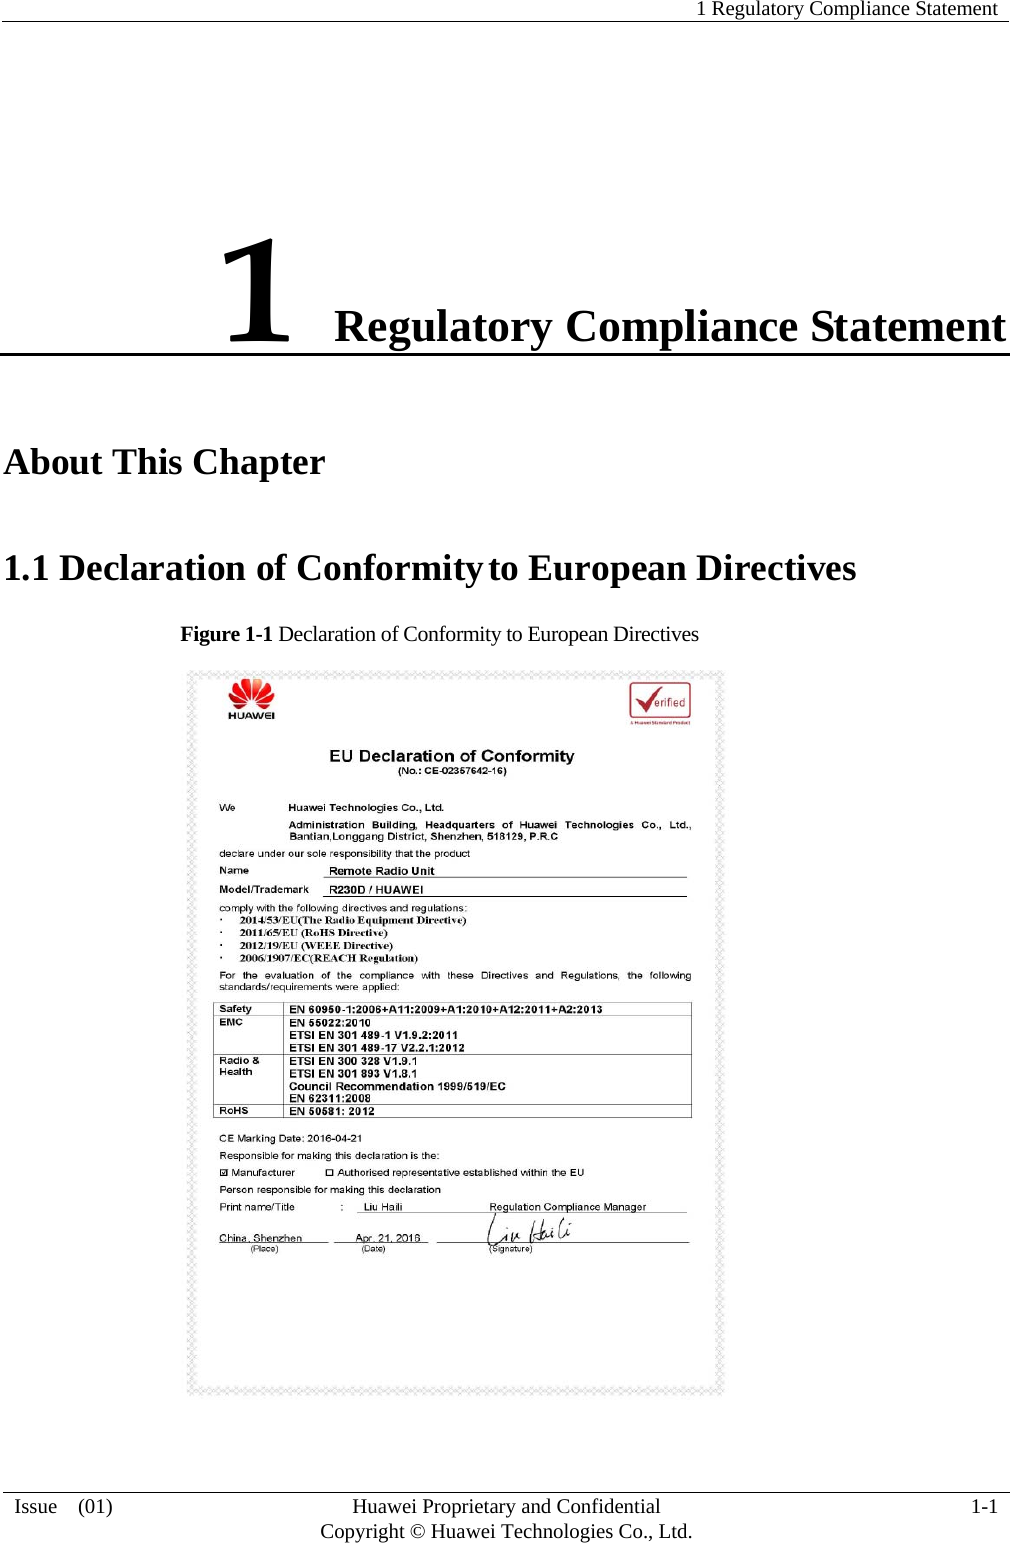   1 Regulatory Compliance Statement  Issue  (01)  Huawei Proprietary and Confidential     Copyright © Huawei Technologies Co., Ltd. 1-1 1 Regulatory Compliance Statement About This Chapter 1.1 Declaration of Conformity to European Directives Figure 1-1 Declaration of Conformity to European Directives    